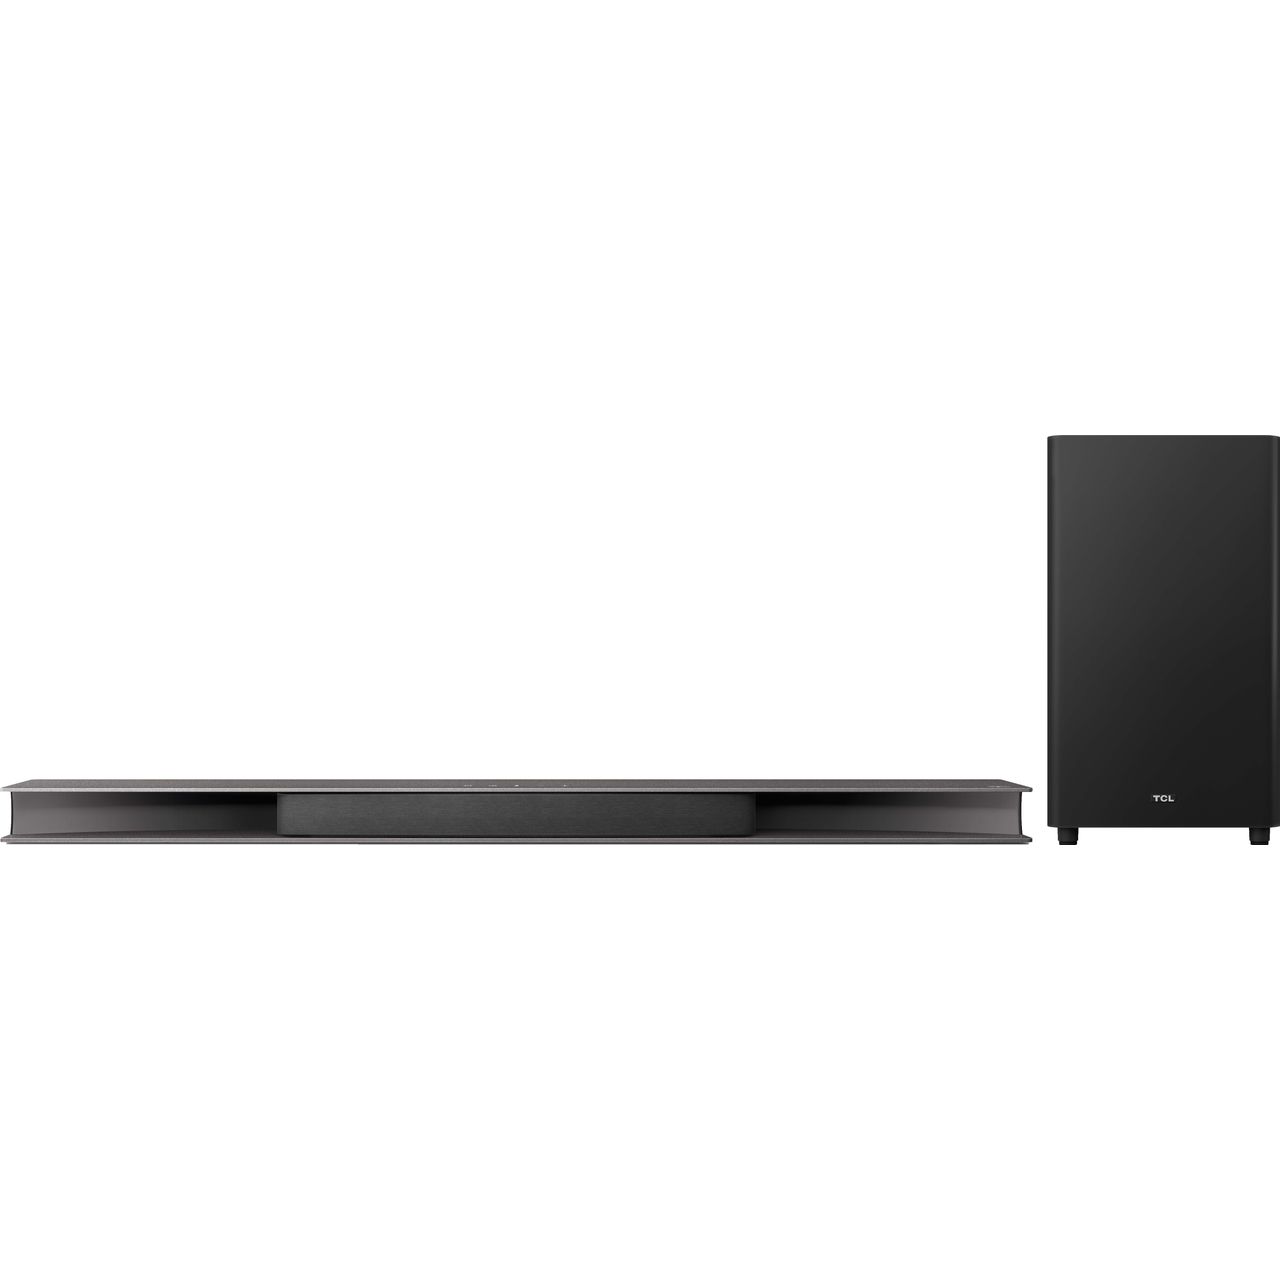 TCL TS9030 Bluetooth 3.1 Soundbar with Wireless Subwoofer Review